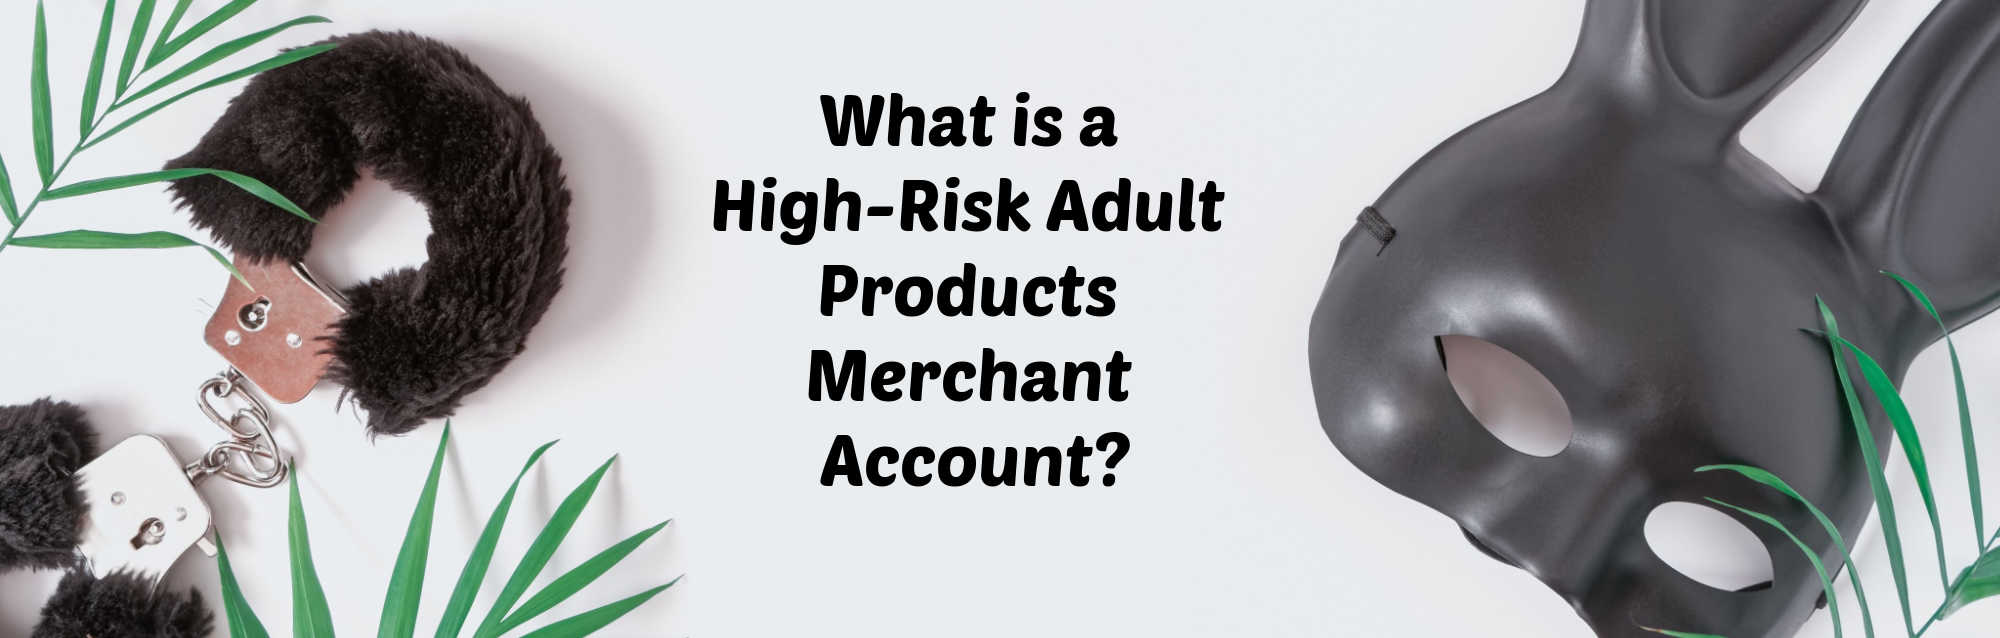 image of what is high risk adult products merchant account